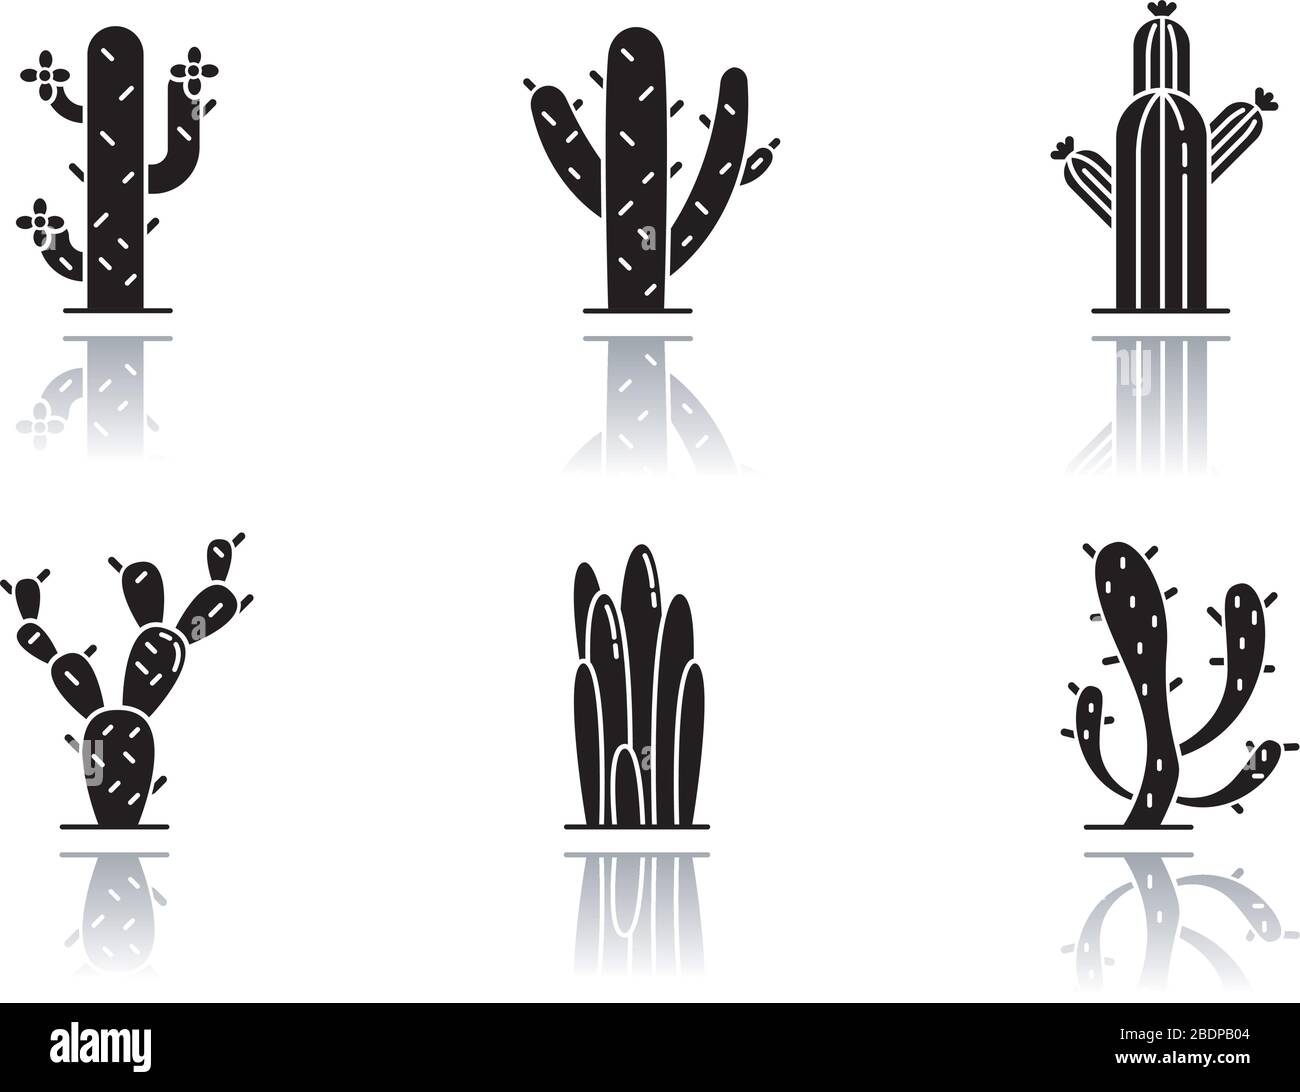 Cactuses drop shadow black glyph icons set. American desert plants. Family Cactaceae. Different prickly succulents. Arid area thorny wildflowers Stock Vector